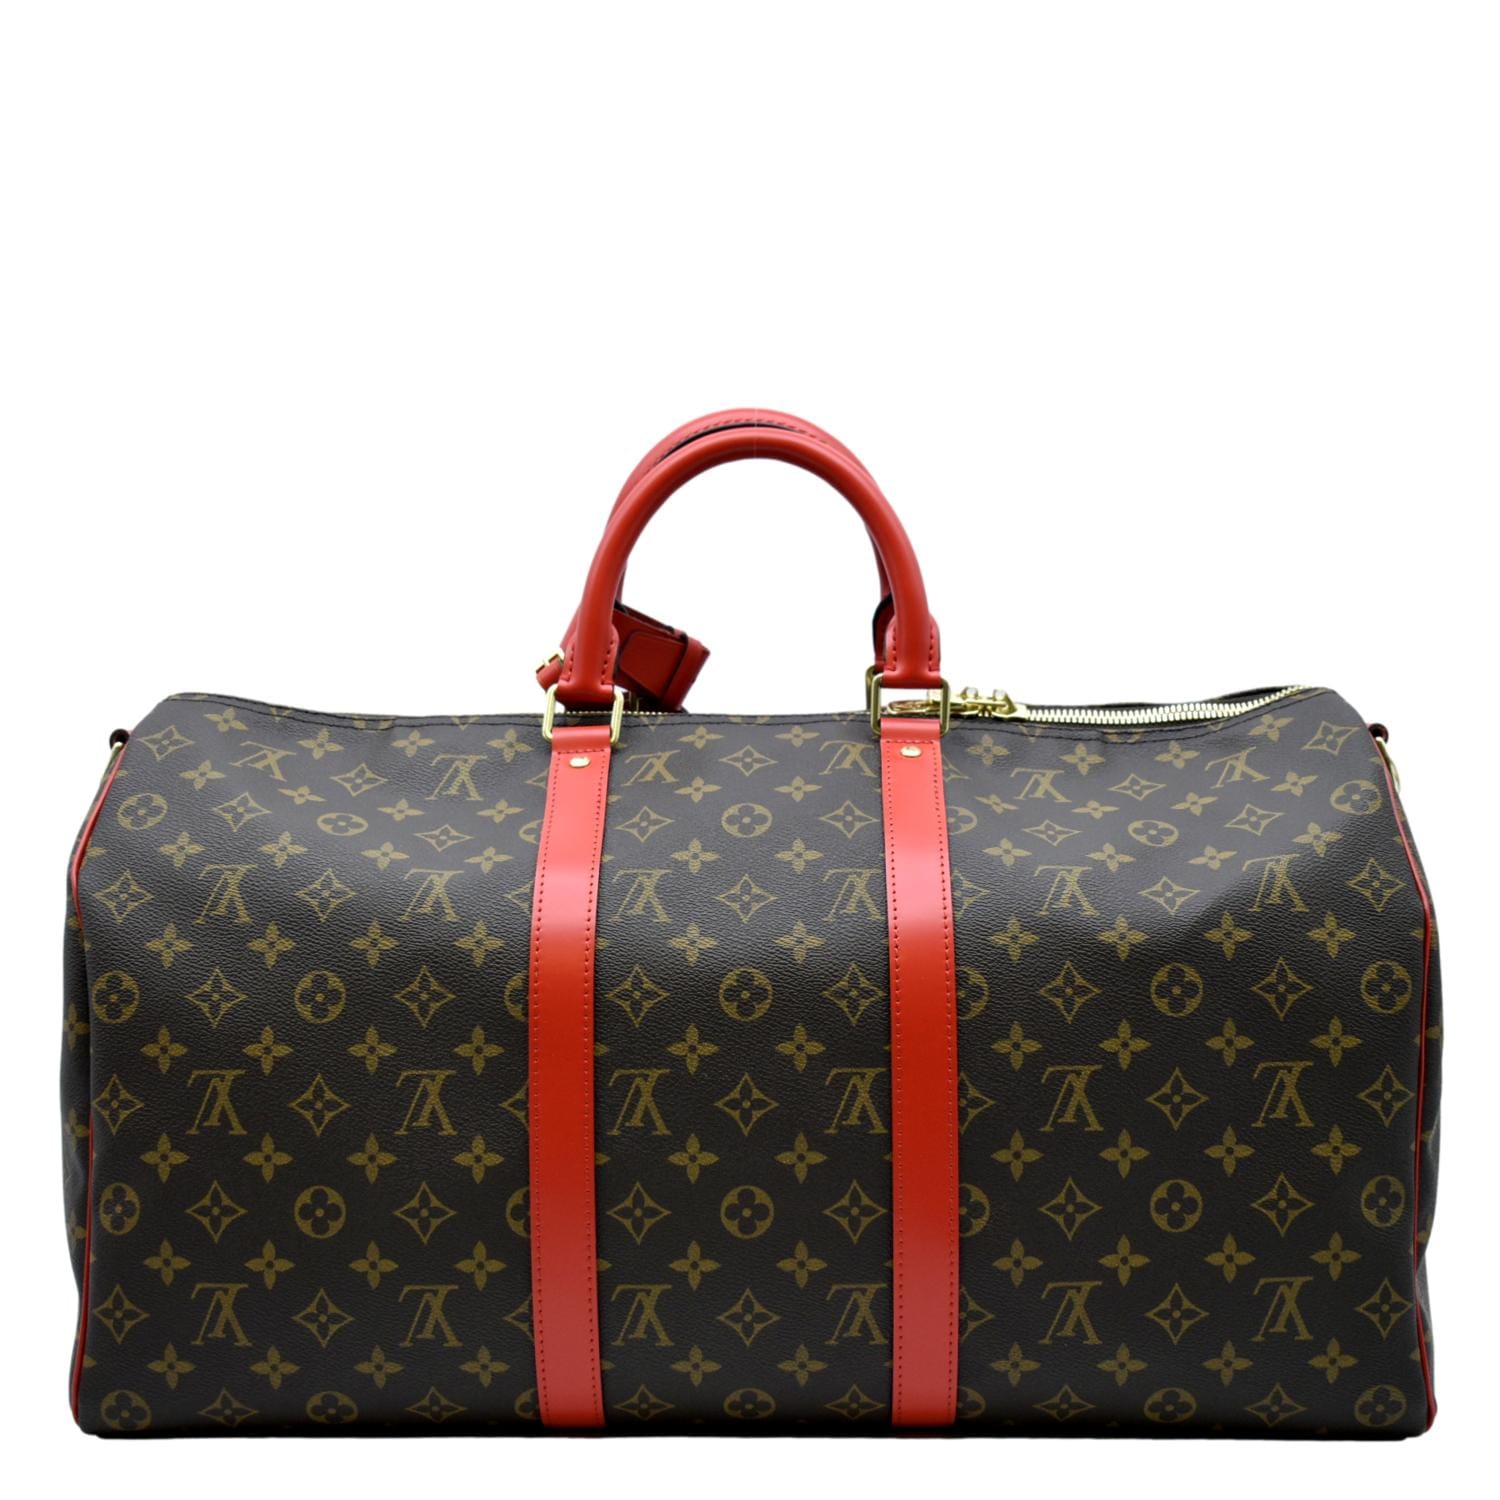 louis vuitton red and white bag